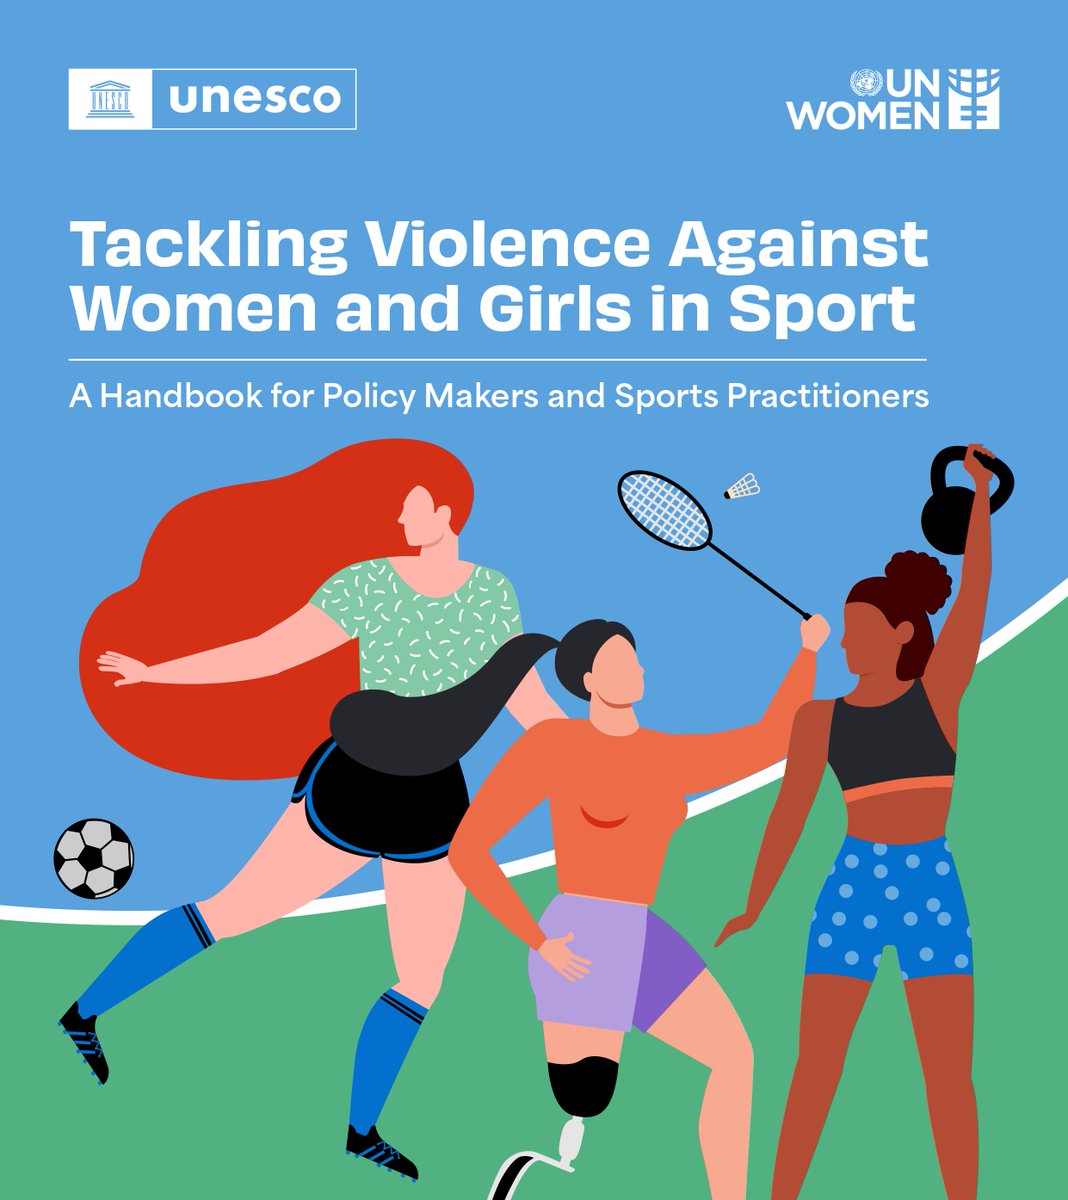 Learn more about @UNESCO #Fit4Life Sports Initiative to support our work: unesco.org/en/fit4life Check out the @UNESCO & @UN_Women policy handbook on “Tackling violence against women and girls in sport”: unesdoc.unesco.org/ark:/48223/pf0… #SportsDay